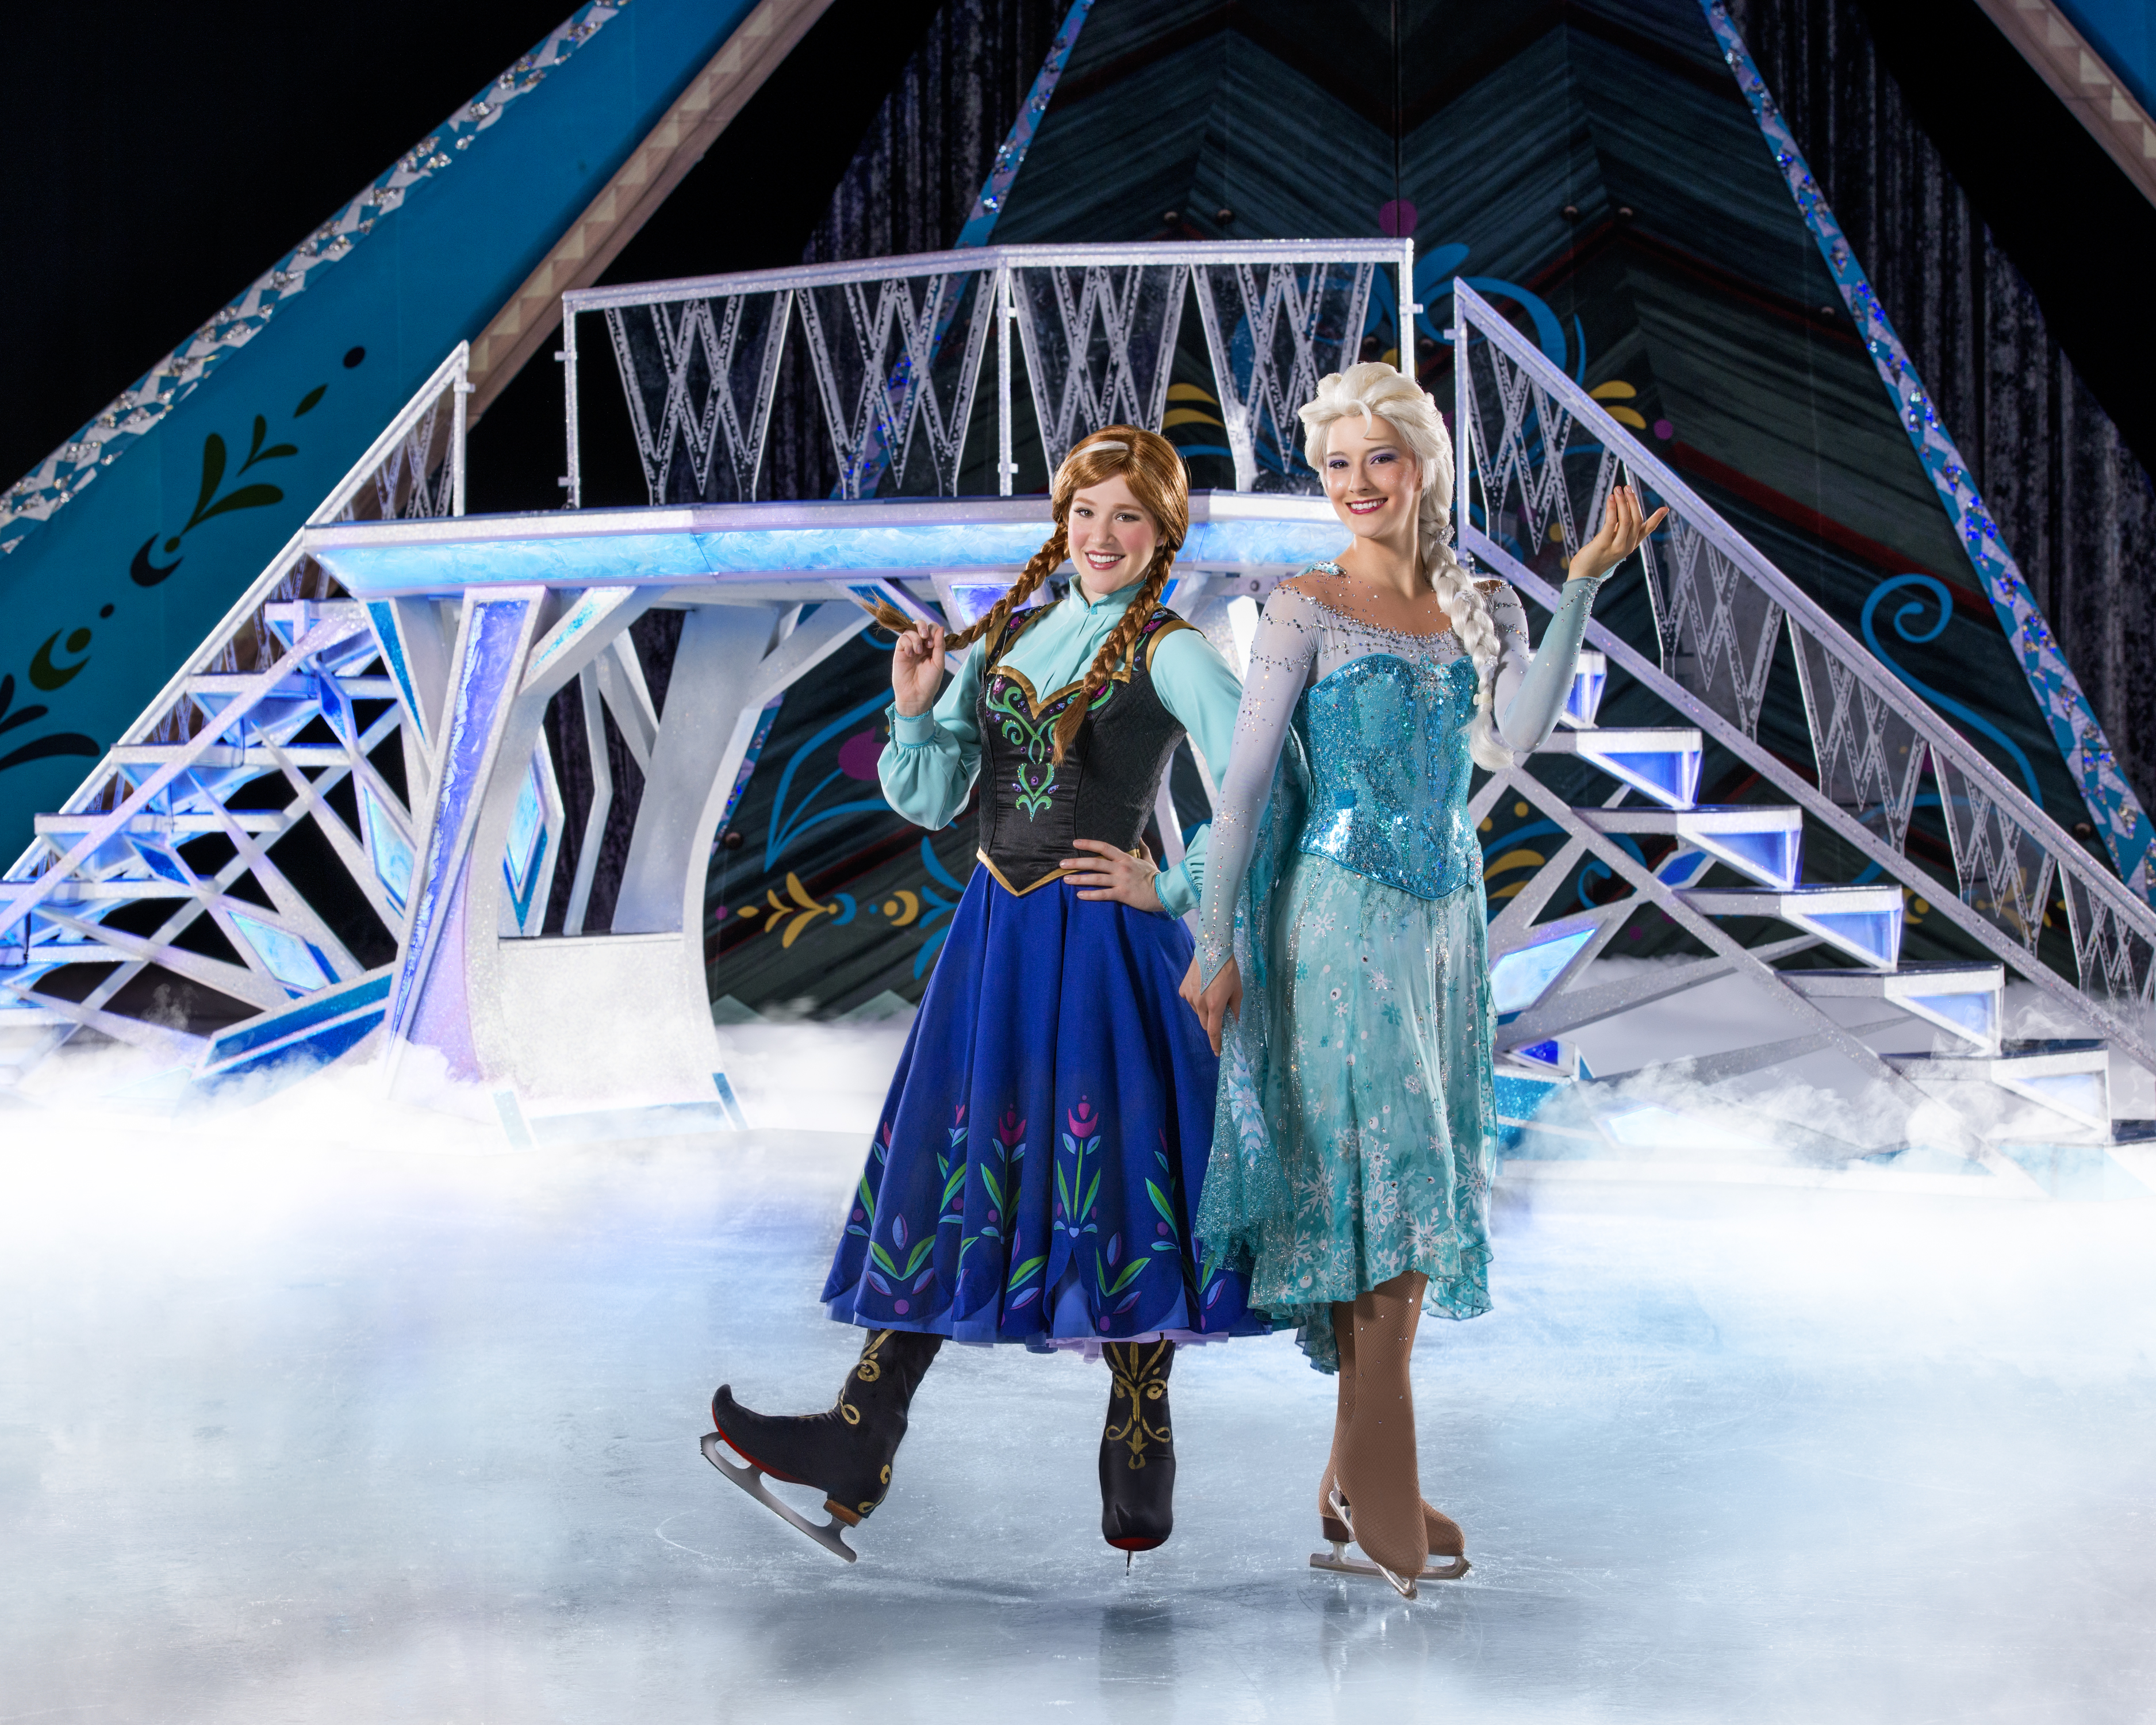 elsa and anna skating on ice during a frozen performance